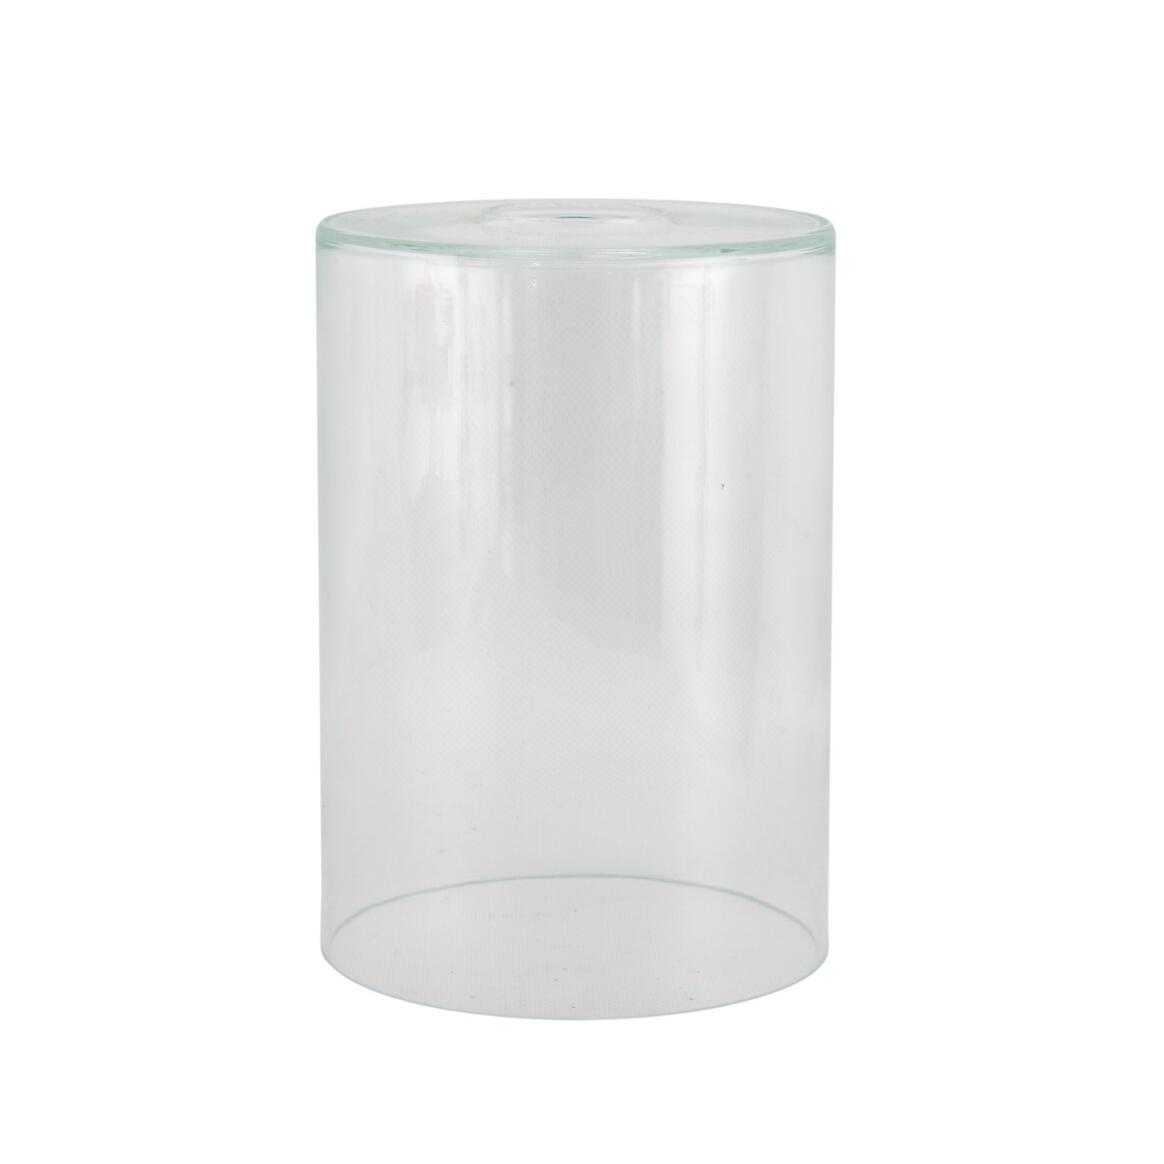 Cylinder clear glass lamp shade 5.5" main product image